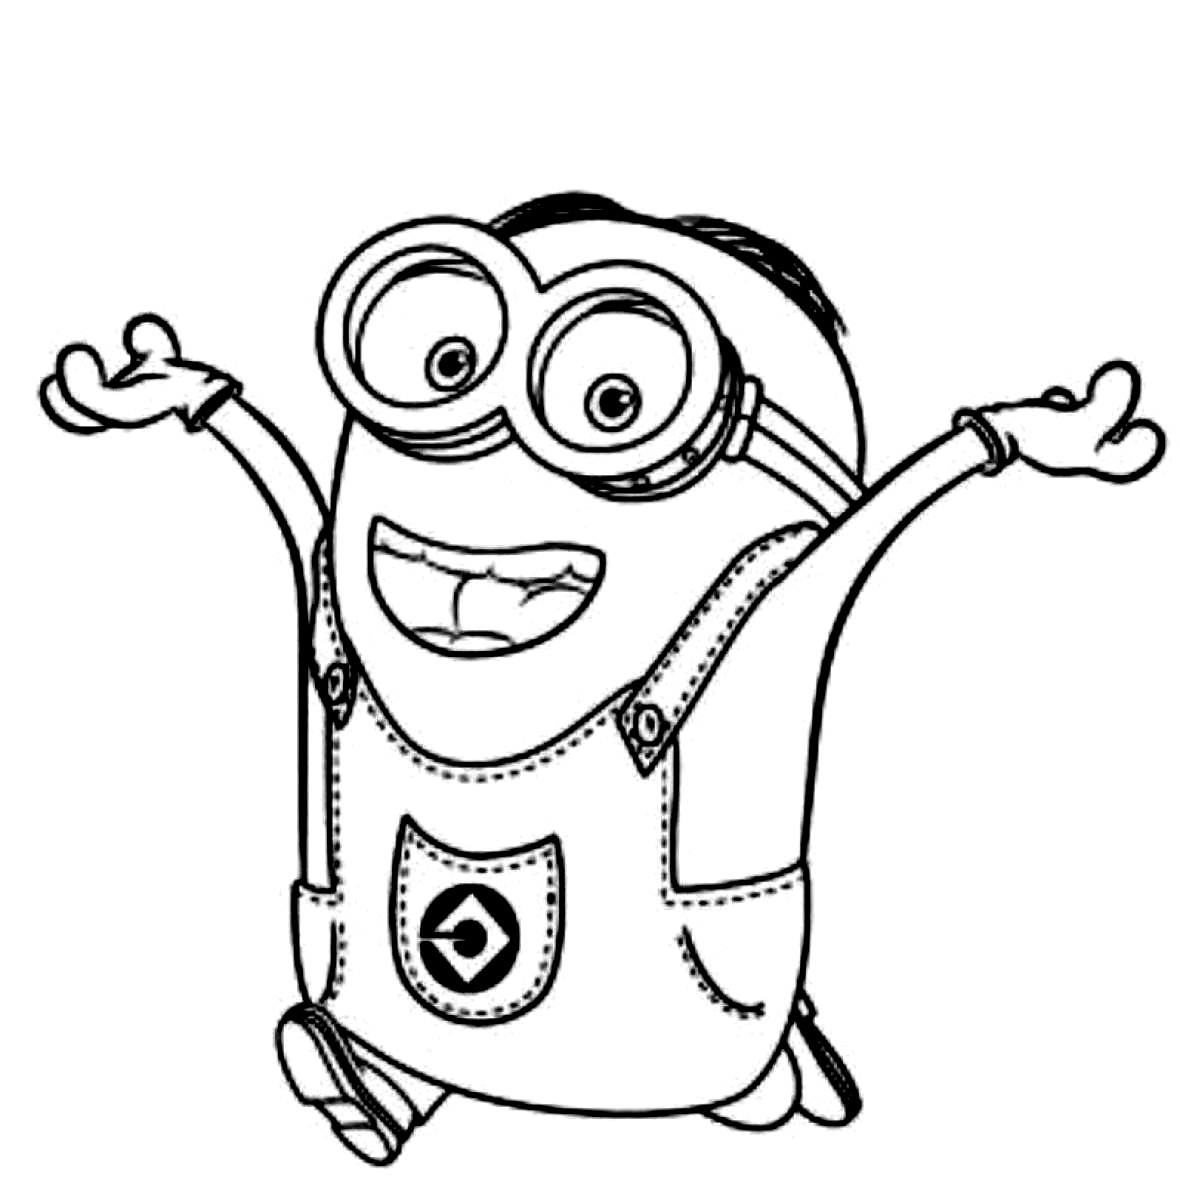 Minion Stuart Running Coloring Page   Free Printable Coloring ...